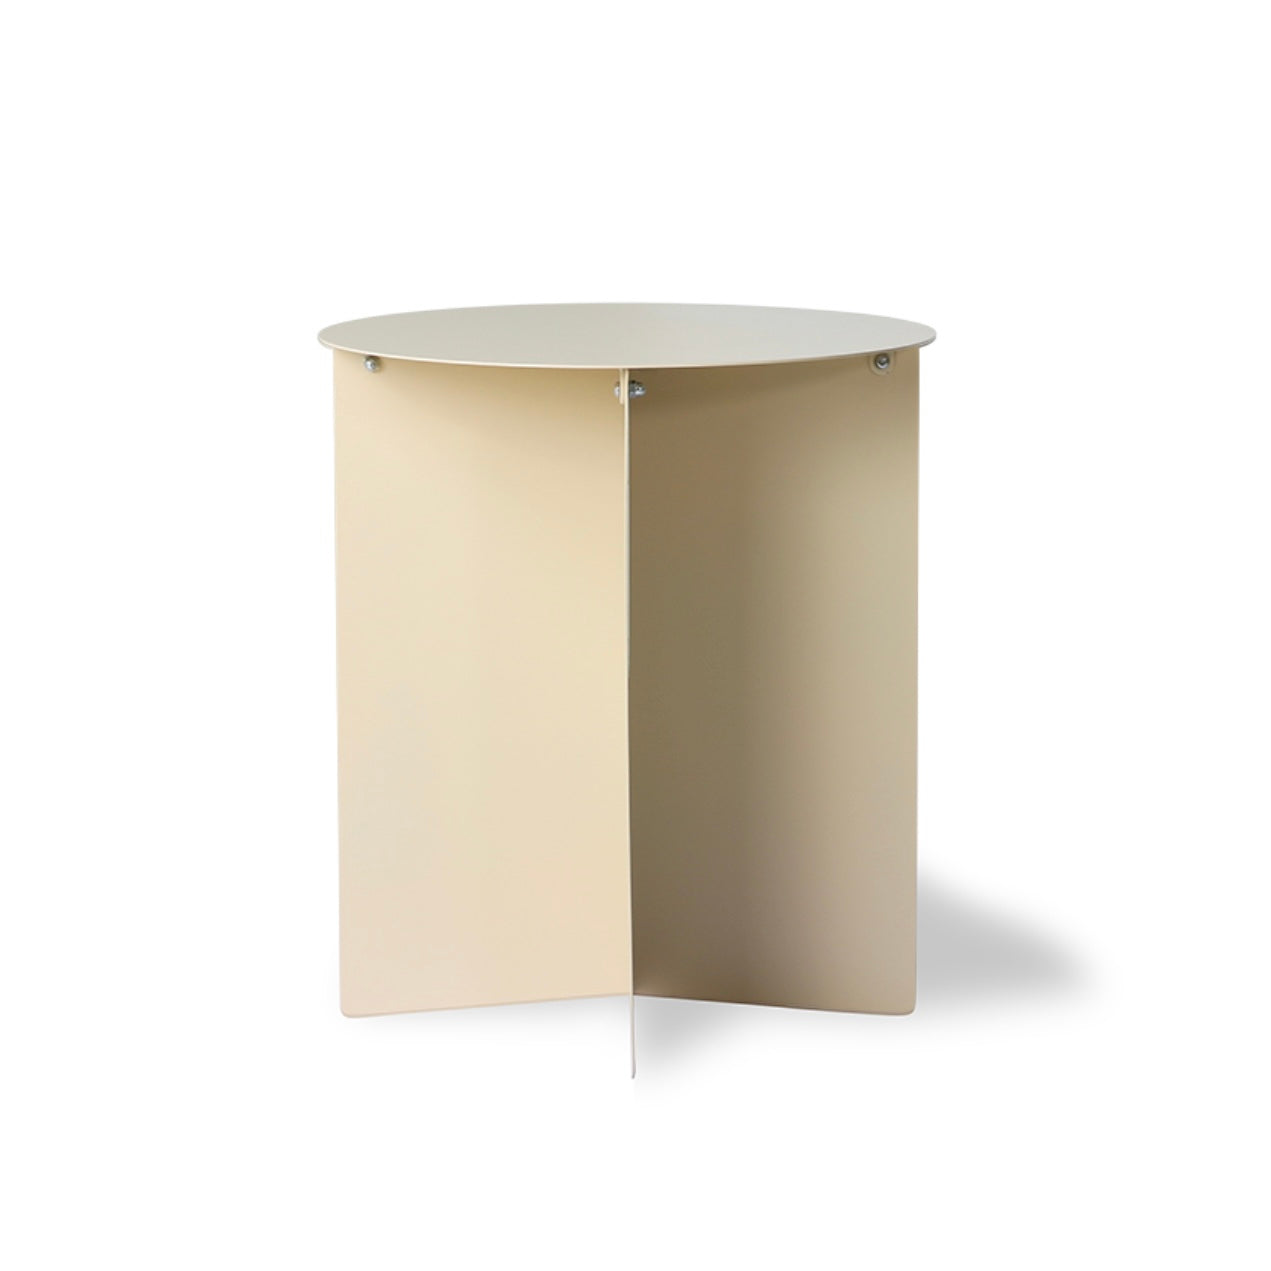 METAL SIDE TABLE ROUND - CREAM